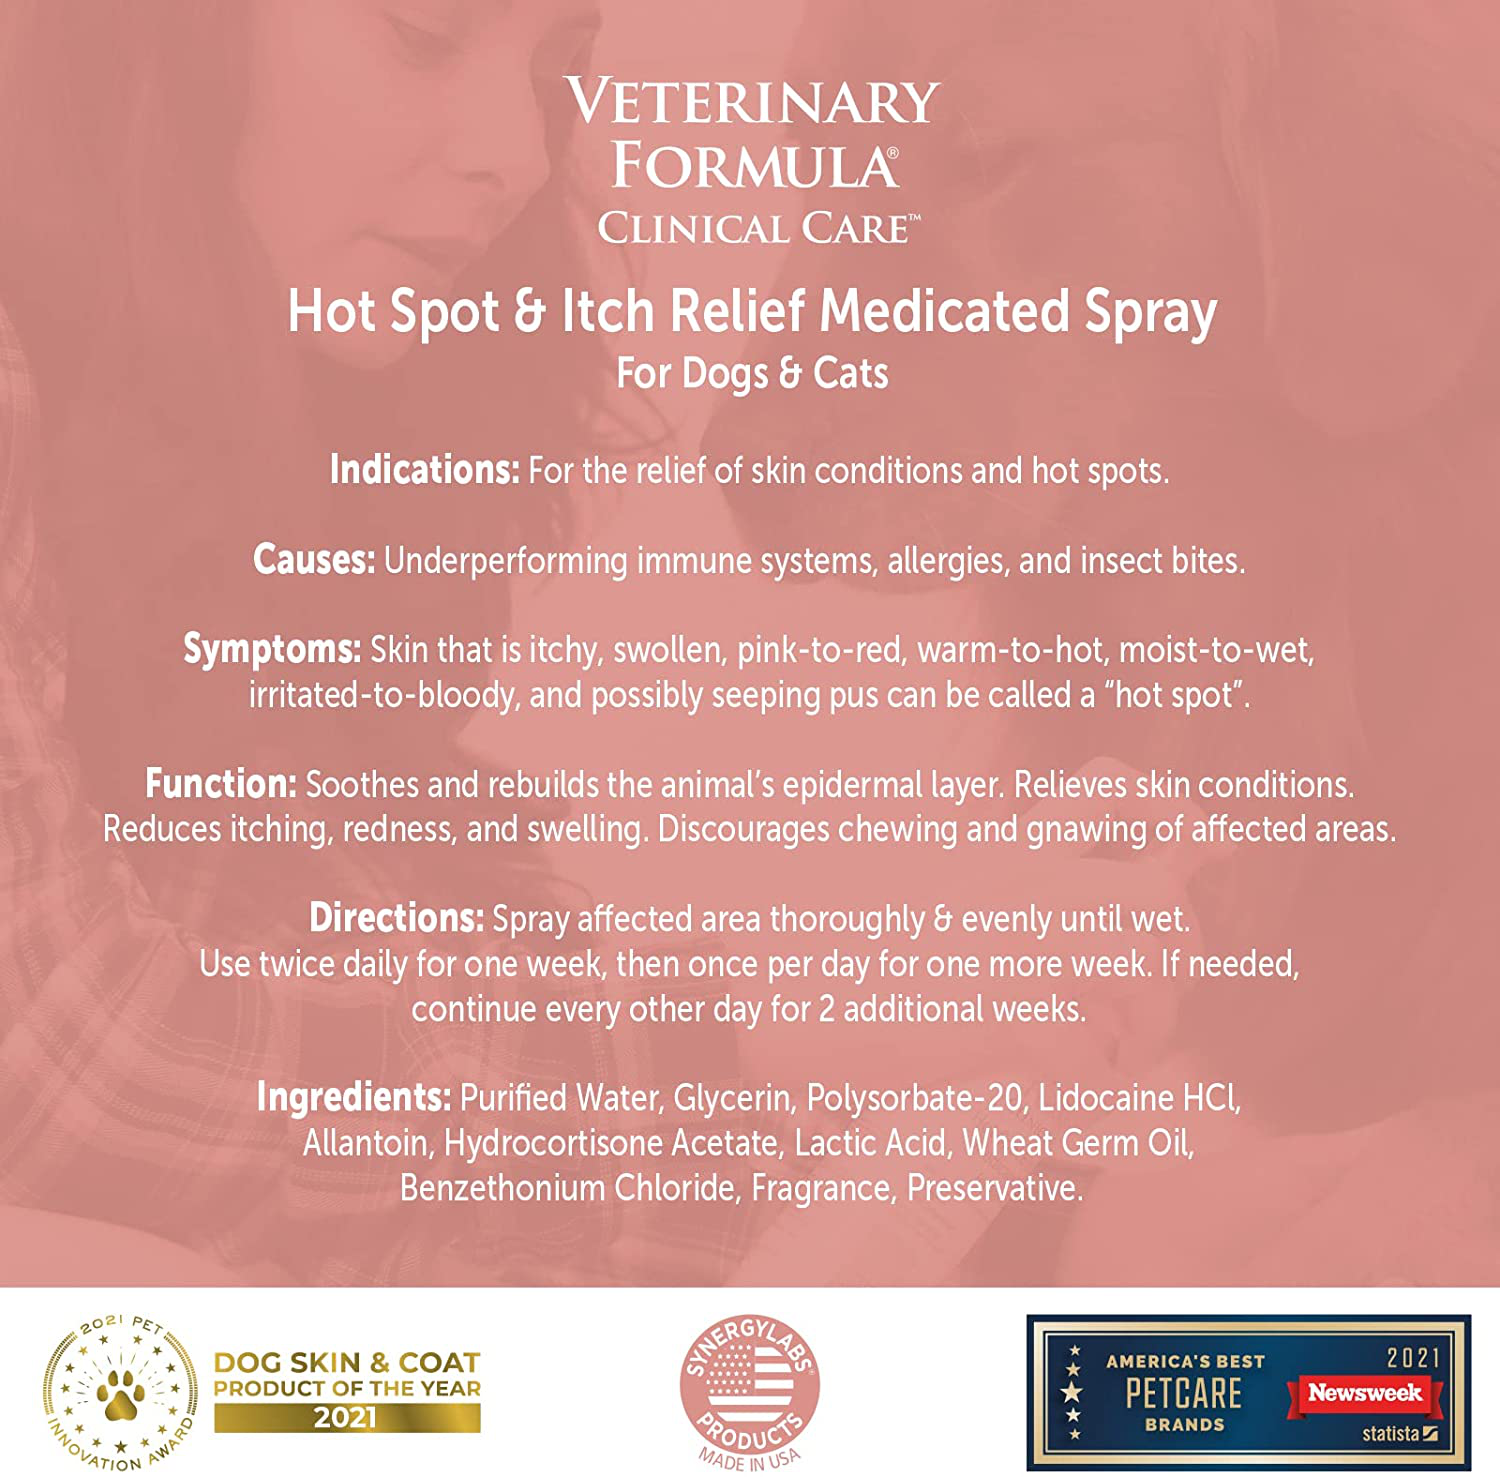 Veterinary Formula Clinical Care Hot Spot & Itch Relief Medicated Spray/Shampoo for Dogs & Cats